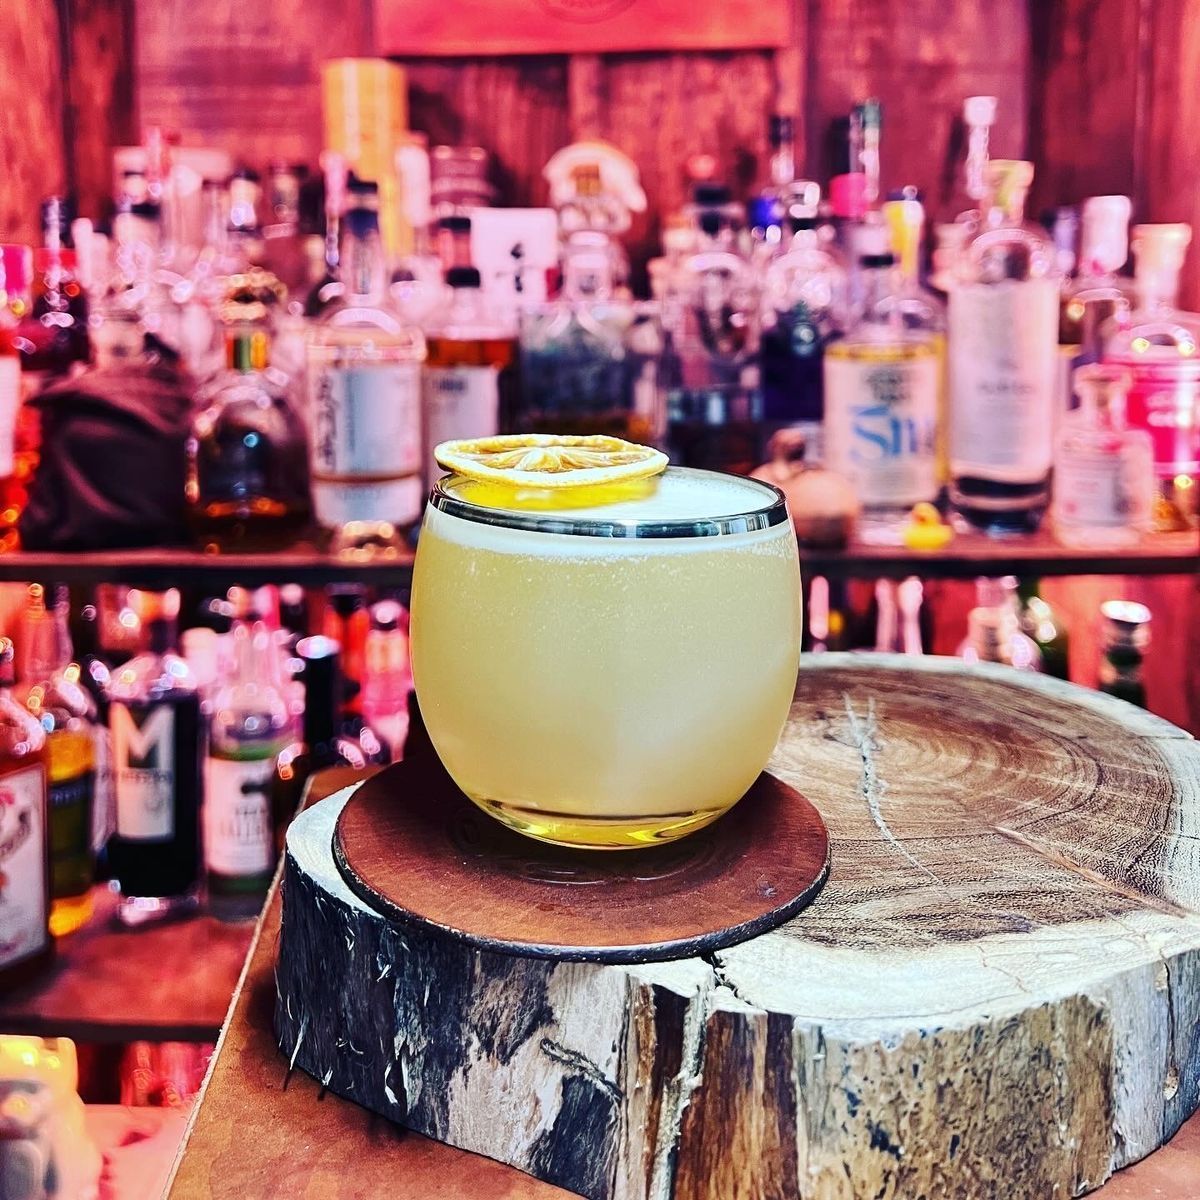 My Whiskey Sour is more than a cocktail; it’s a sip of paradise in the springtime. It’s a reminder of nature’s beauty, fresh beginnings, and the pure joy of savoring life’s simple pleasures. Here’s to the magic of cocktails that transport us to the most beautiful places! 

Share your own paradise moments and let’s toast to the serenity of spring and the flavors that make life a paradise. Cheers to sipping in style!